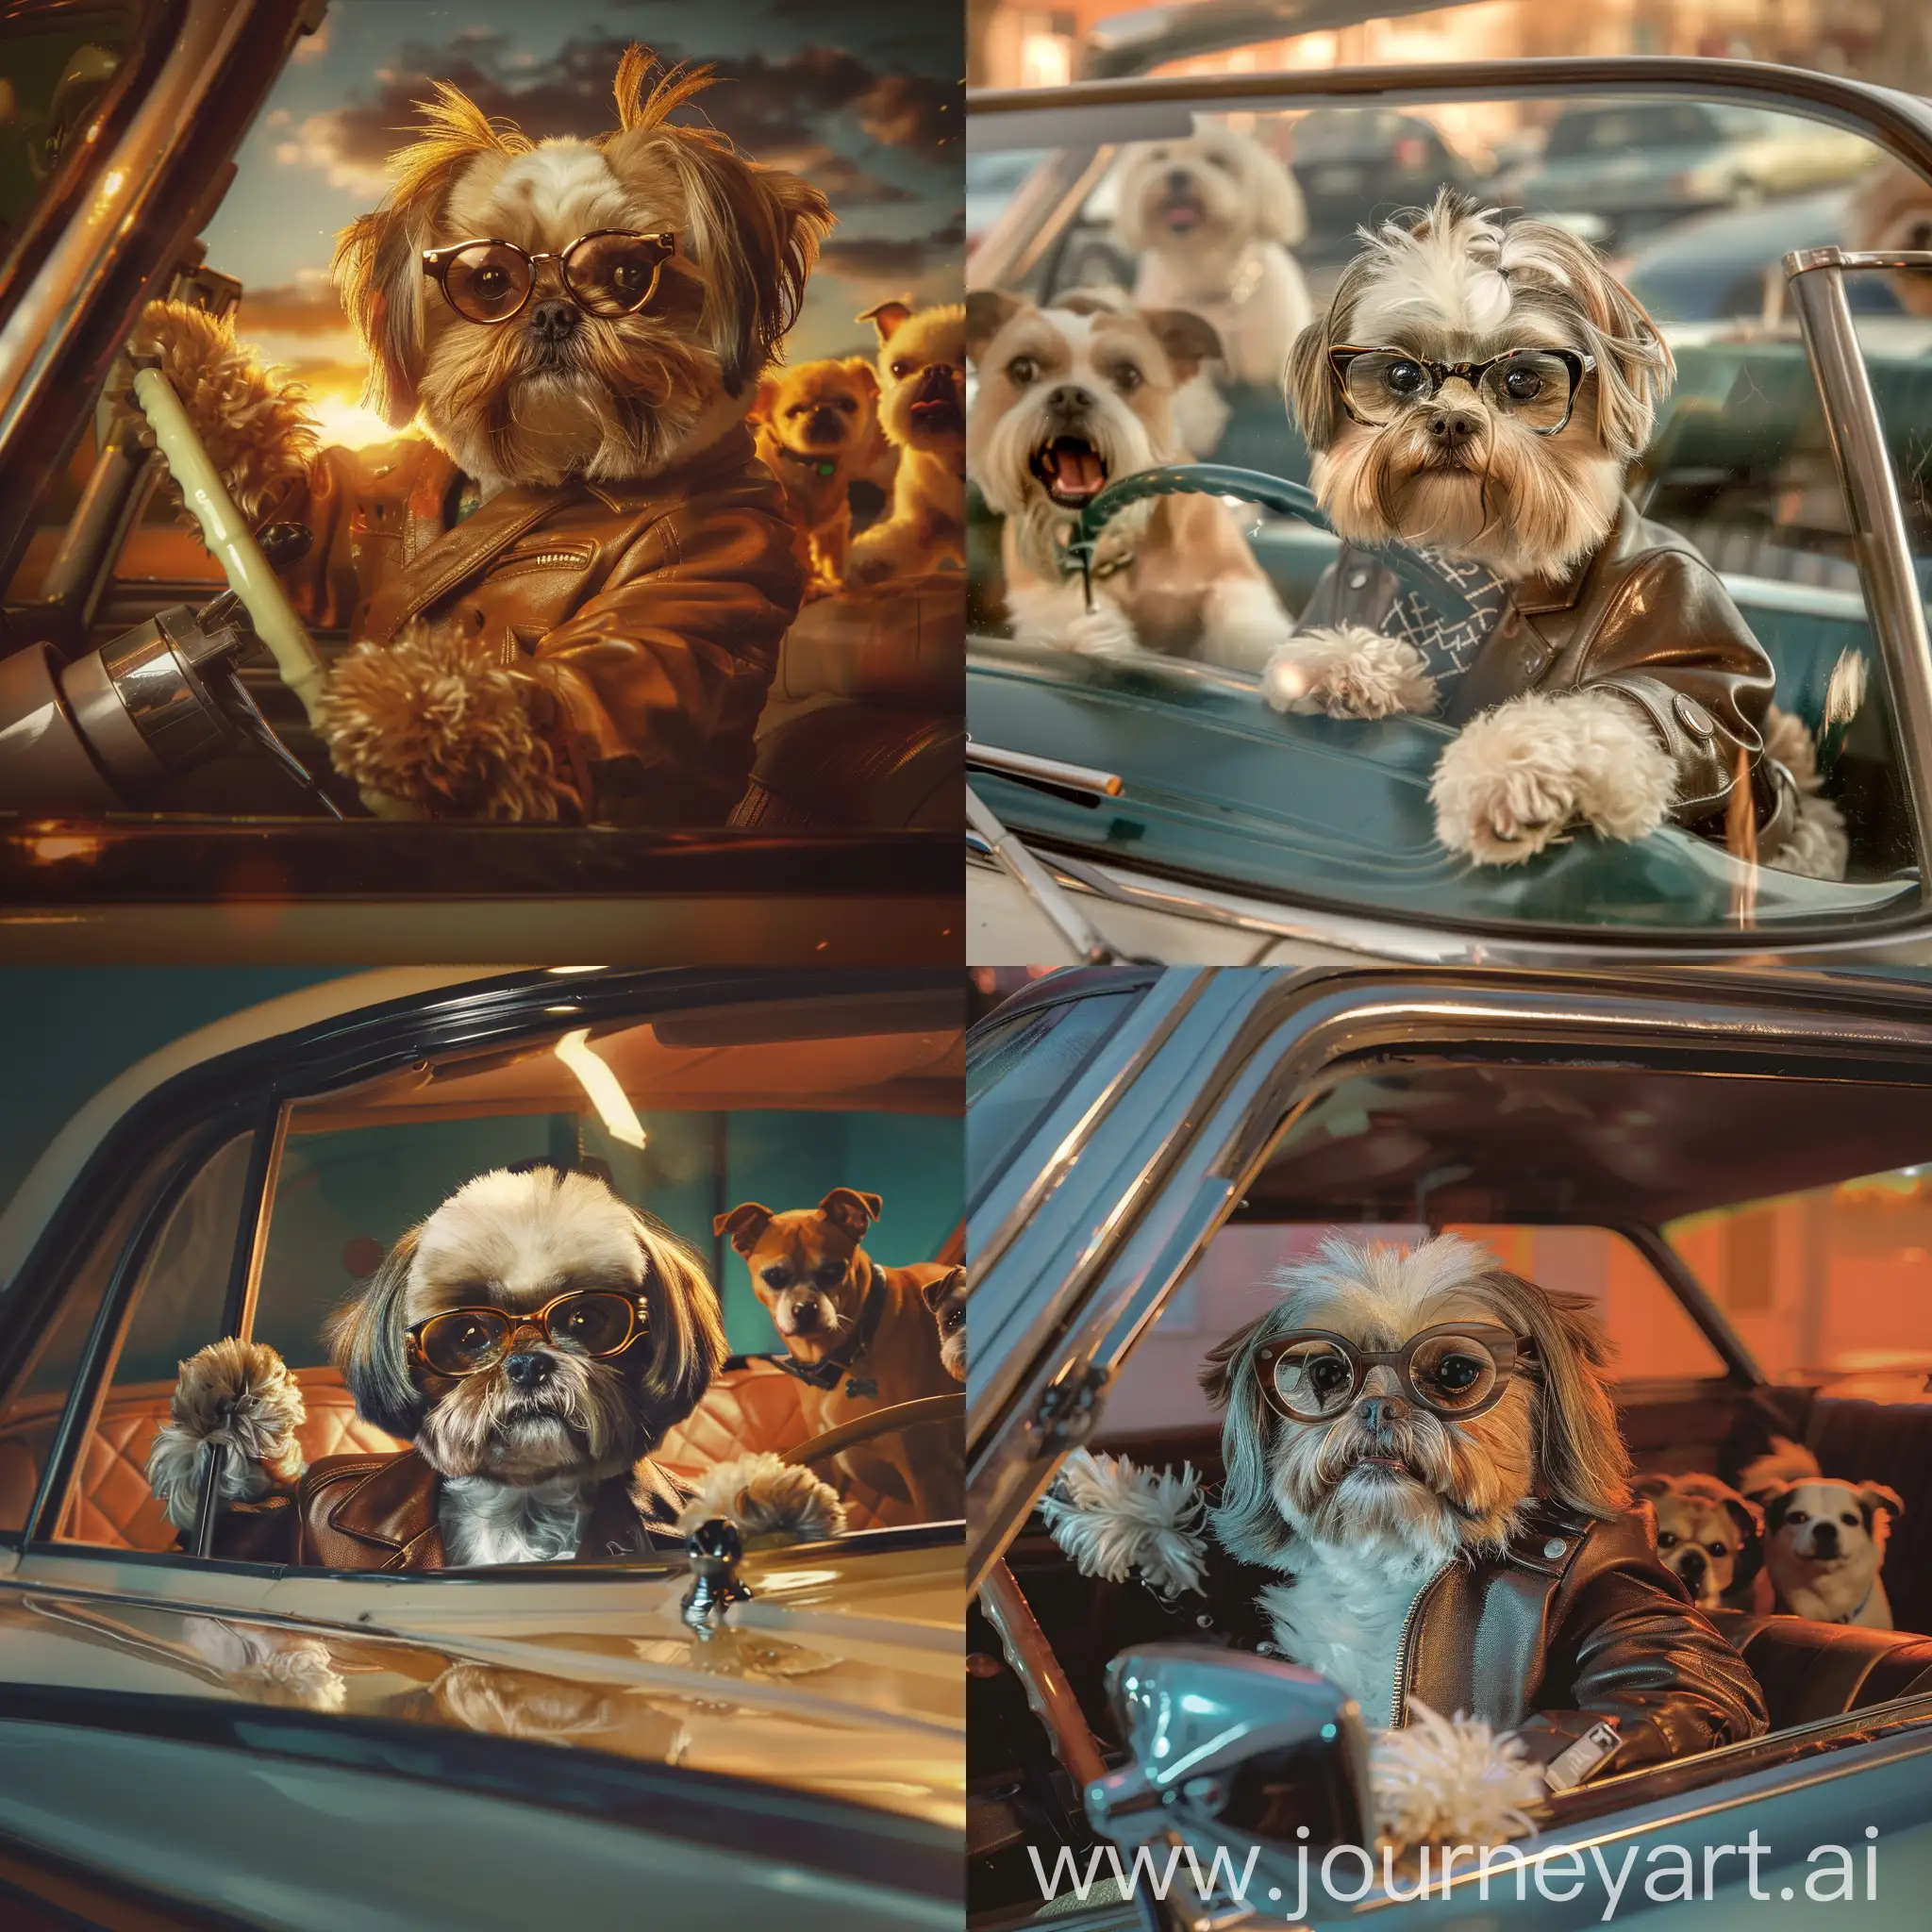 Shih-tzu wearing the glasses and leather jacket driving a shiny Plymouth from the fifties. Dogs around seem jealous 